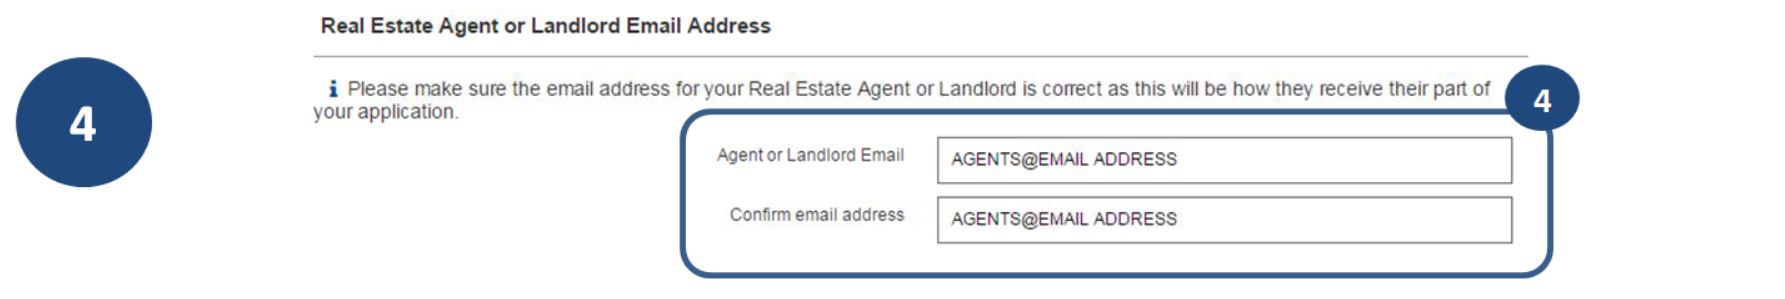 4. Enter and confirm the email address of the Real estate agent / landlord, ensuring they are both correct.